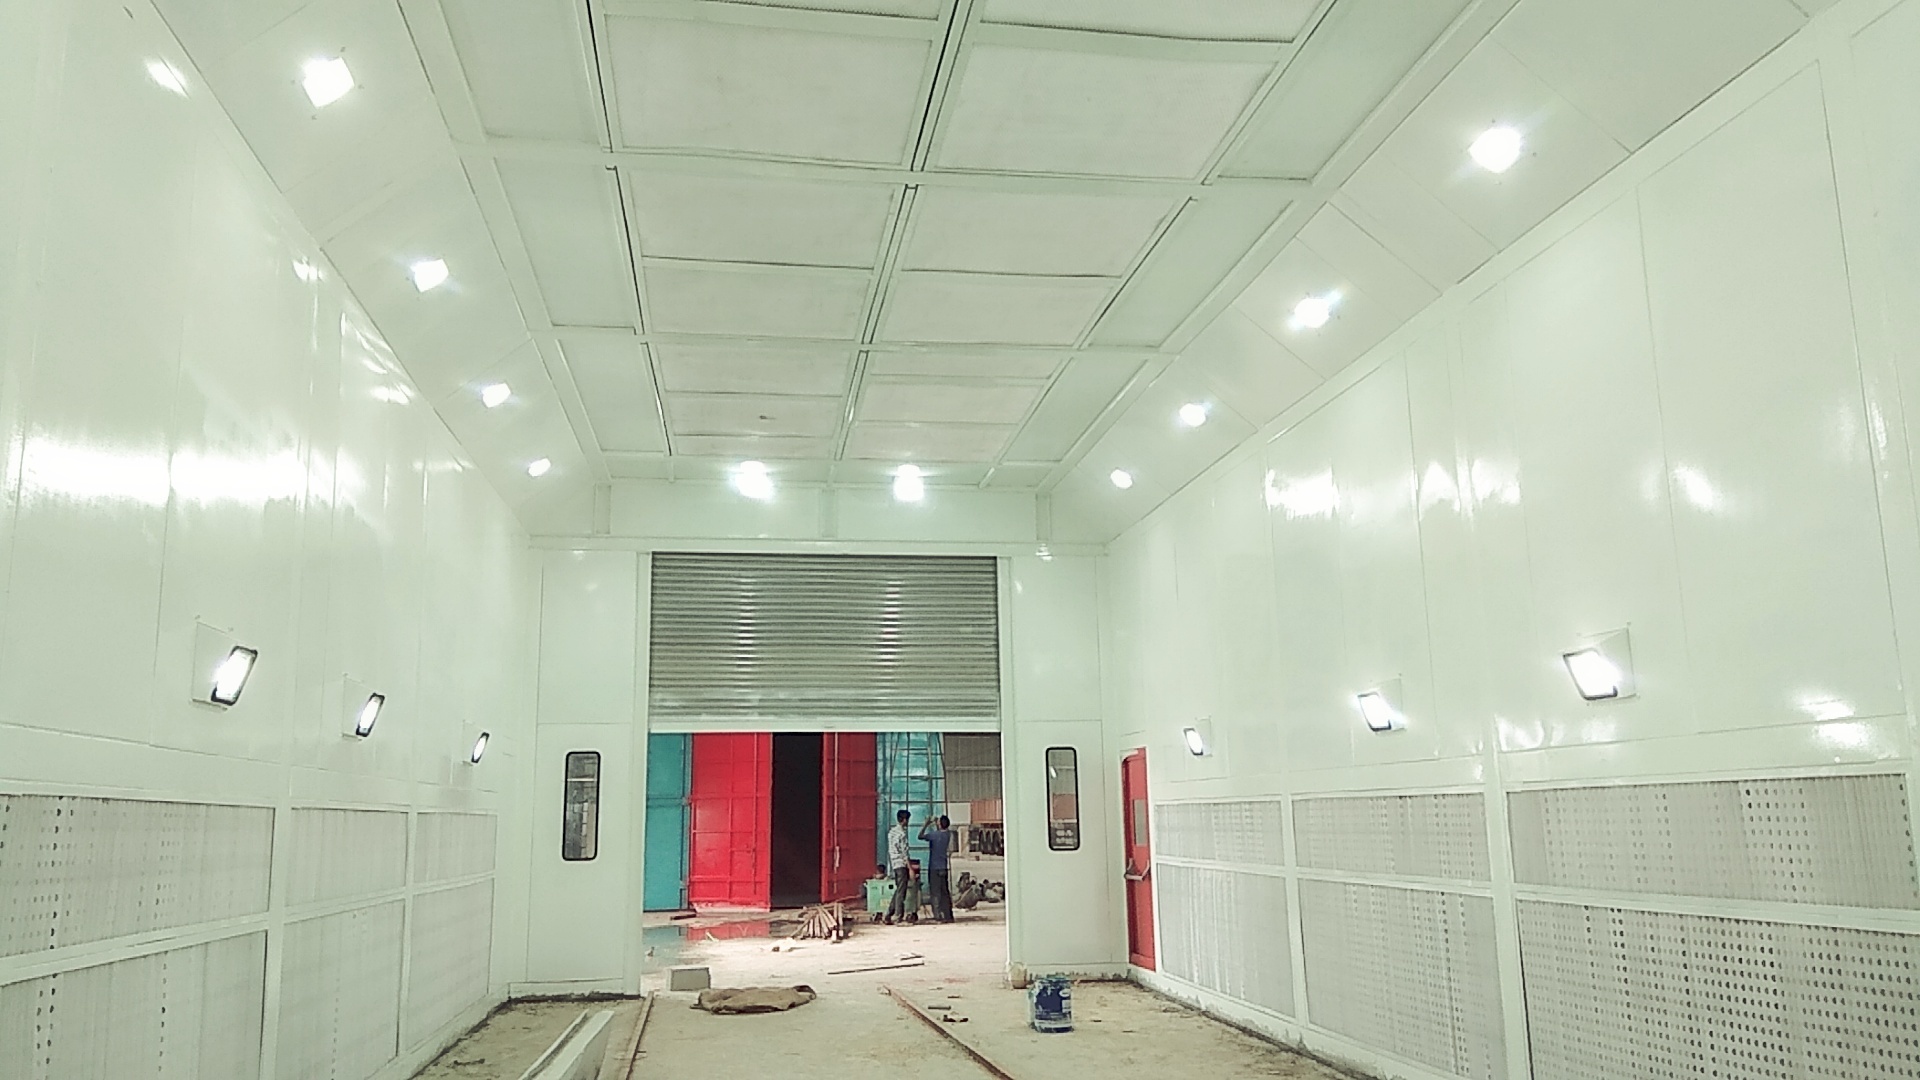 Industrial Paint Booths